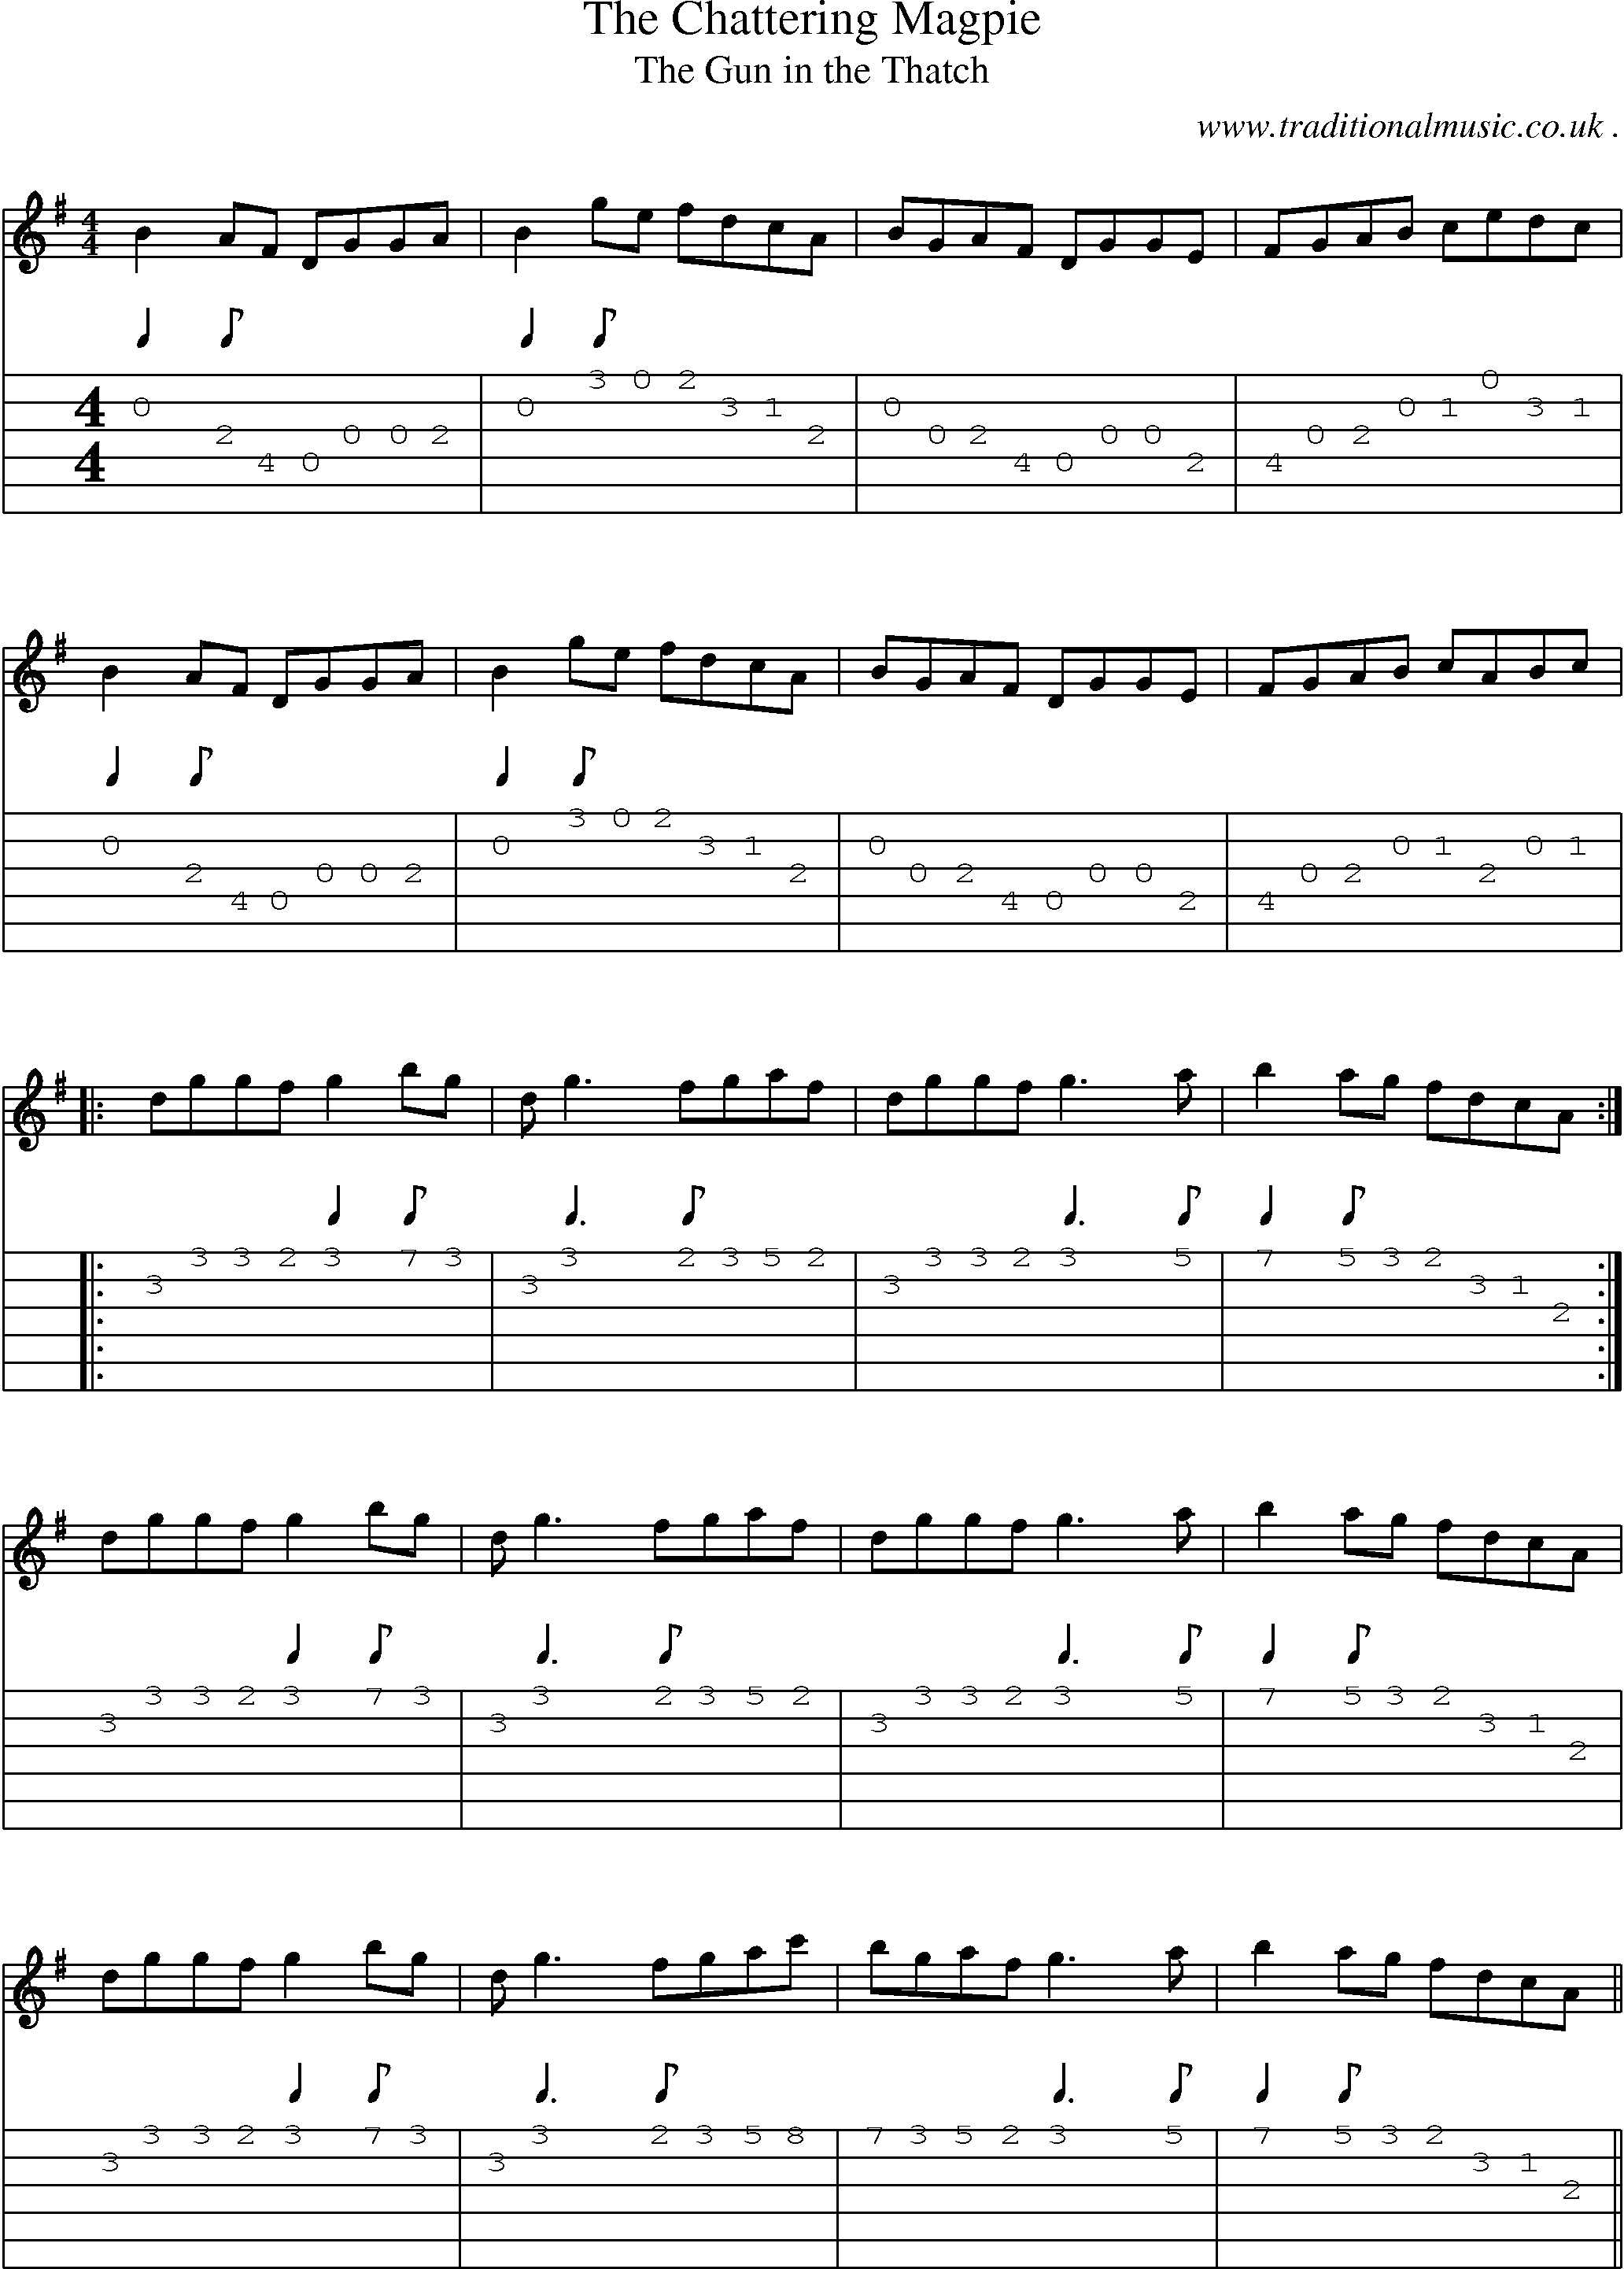 Sheet-Music and Guitar Tabs for The Chattering Magpie